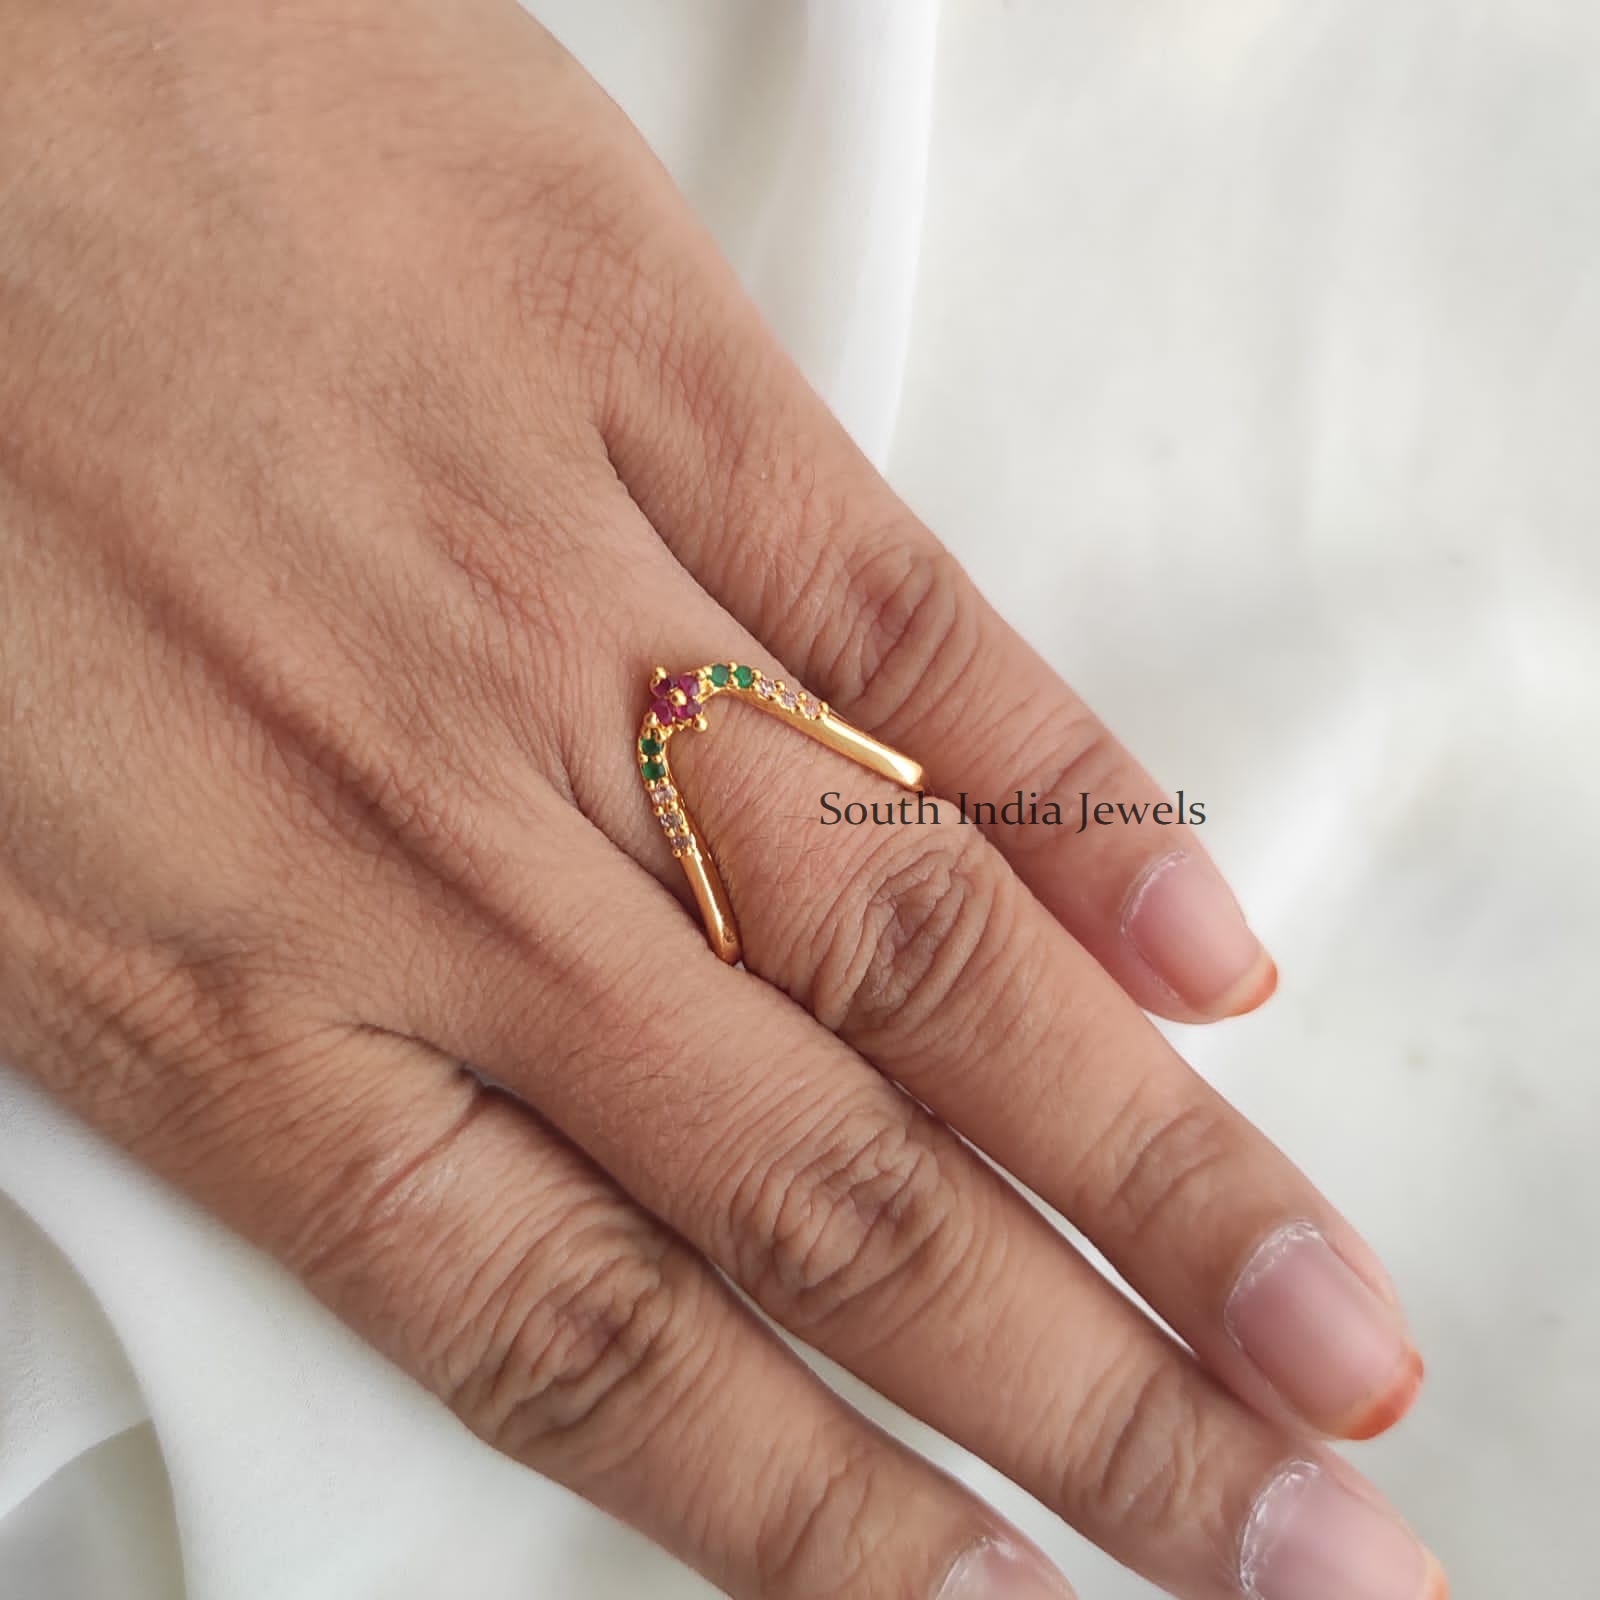 11 Unique South Indian Gold Ring Designs To Elevate Your Style - My Blog